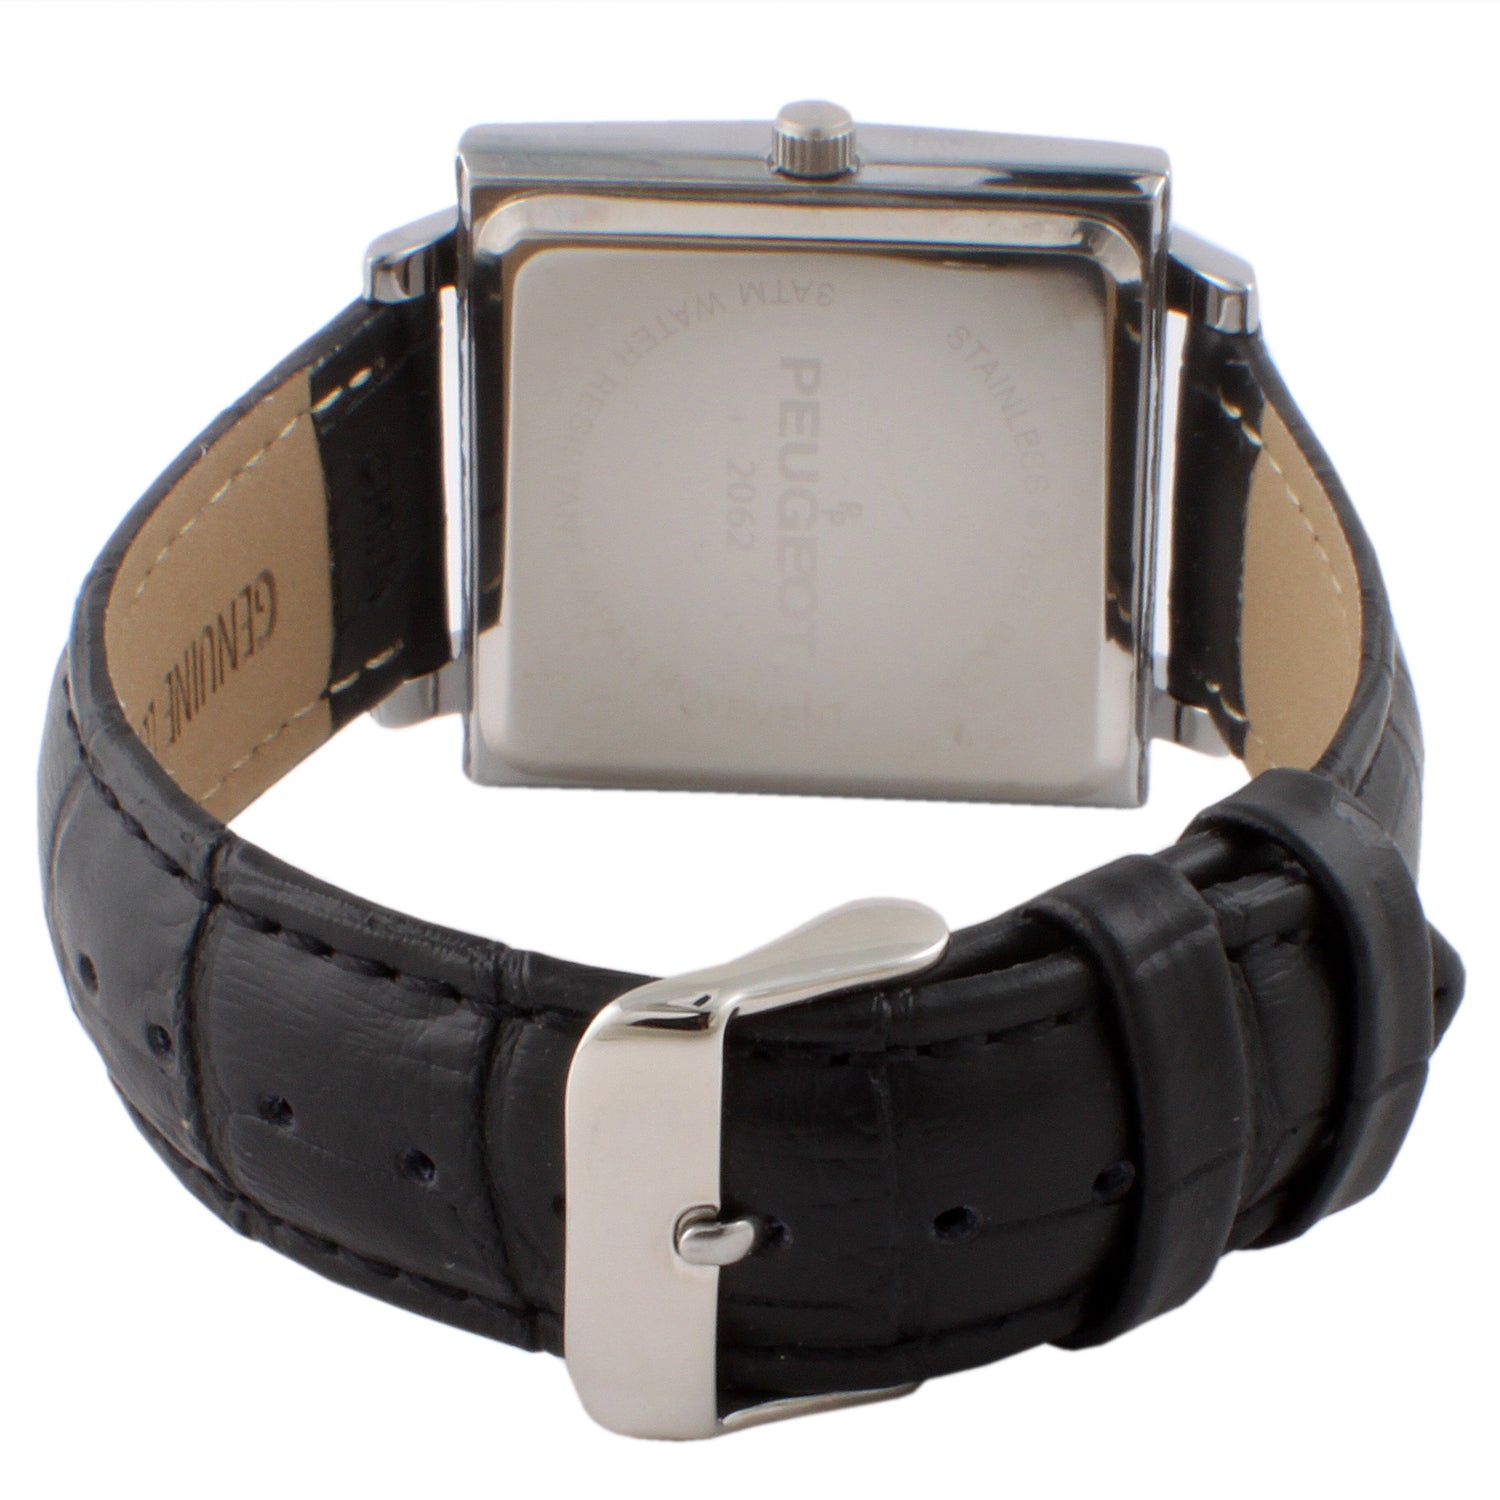 Peugeot Men's Watch Square Grey DIal with Leather Band - Peugeot Watches